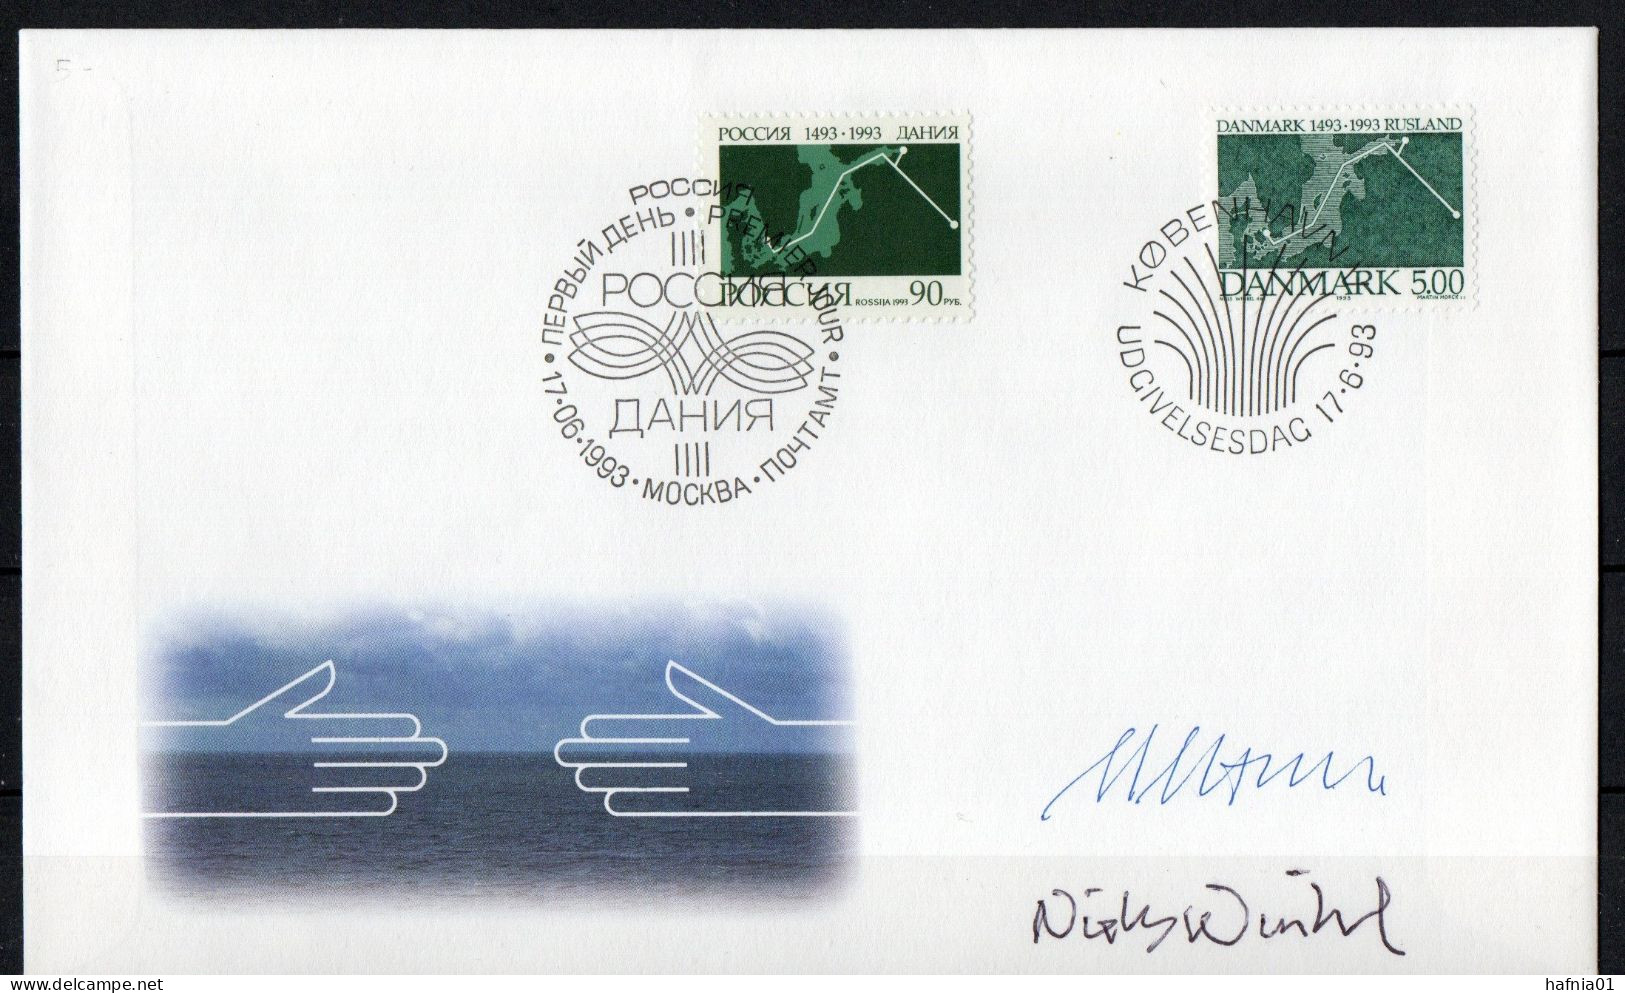 Martin Mörck. Denmark1993. 500 Anniv Of Diplomatic Relations Between Denmark And Russia. Michel 1056 FDC. Signed. - FDC